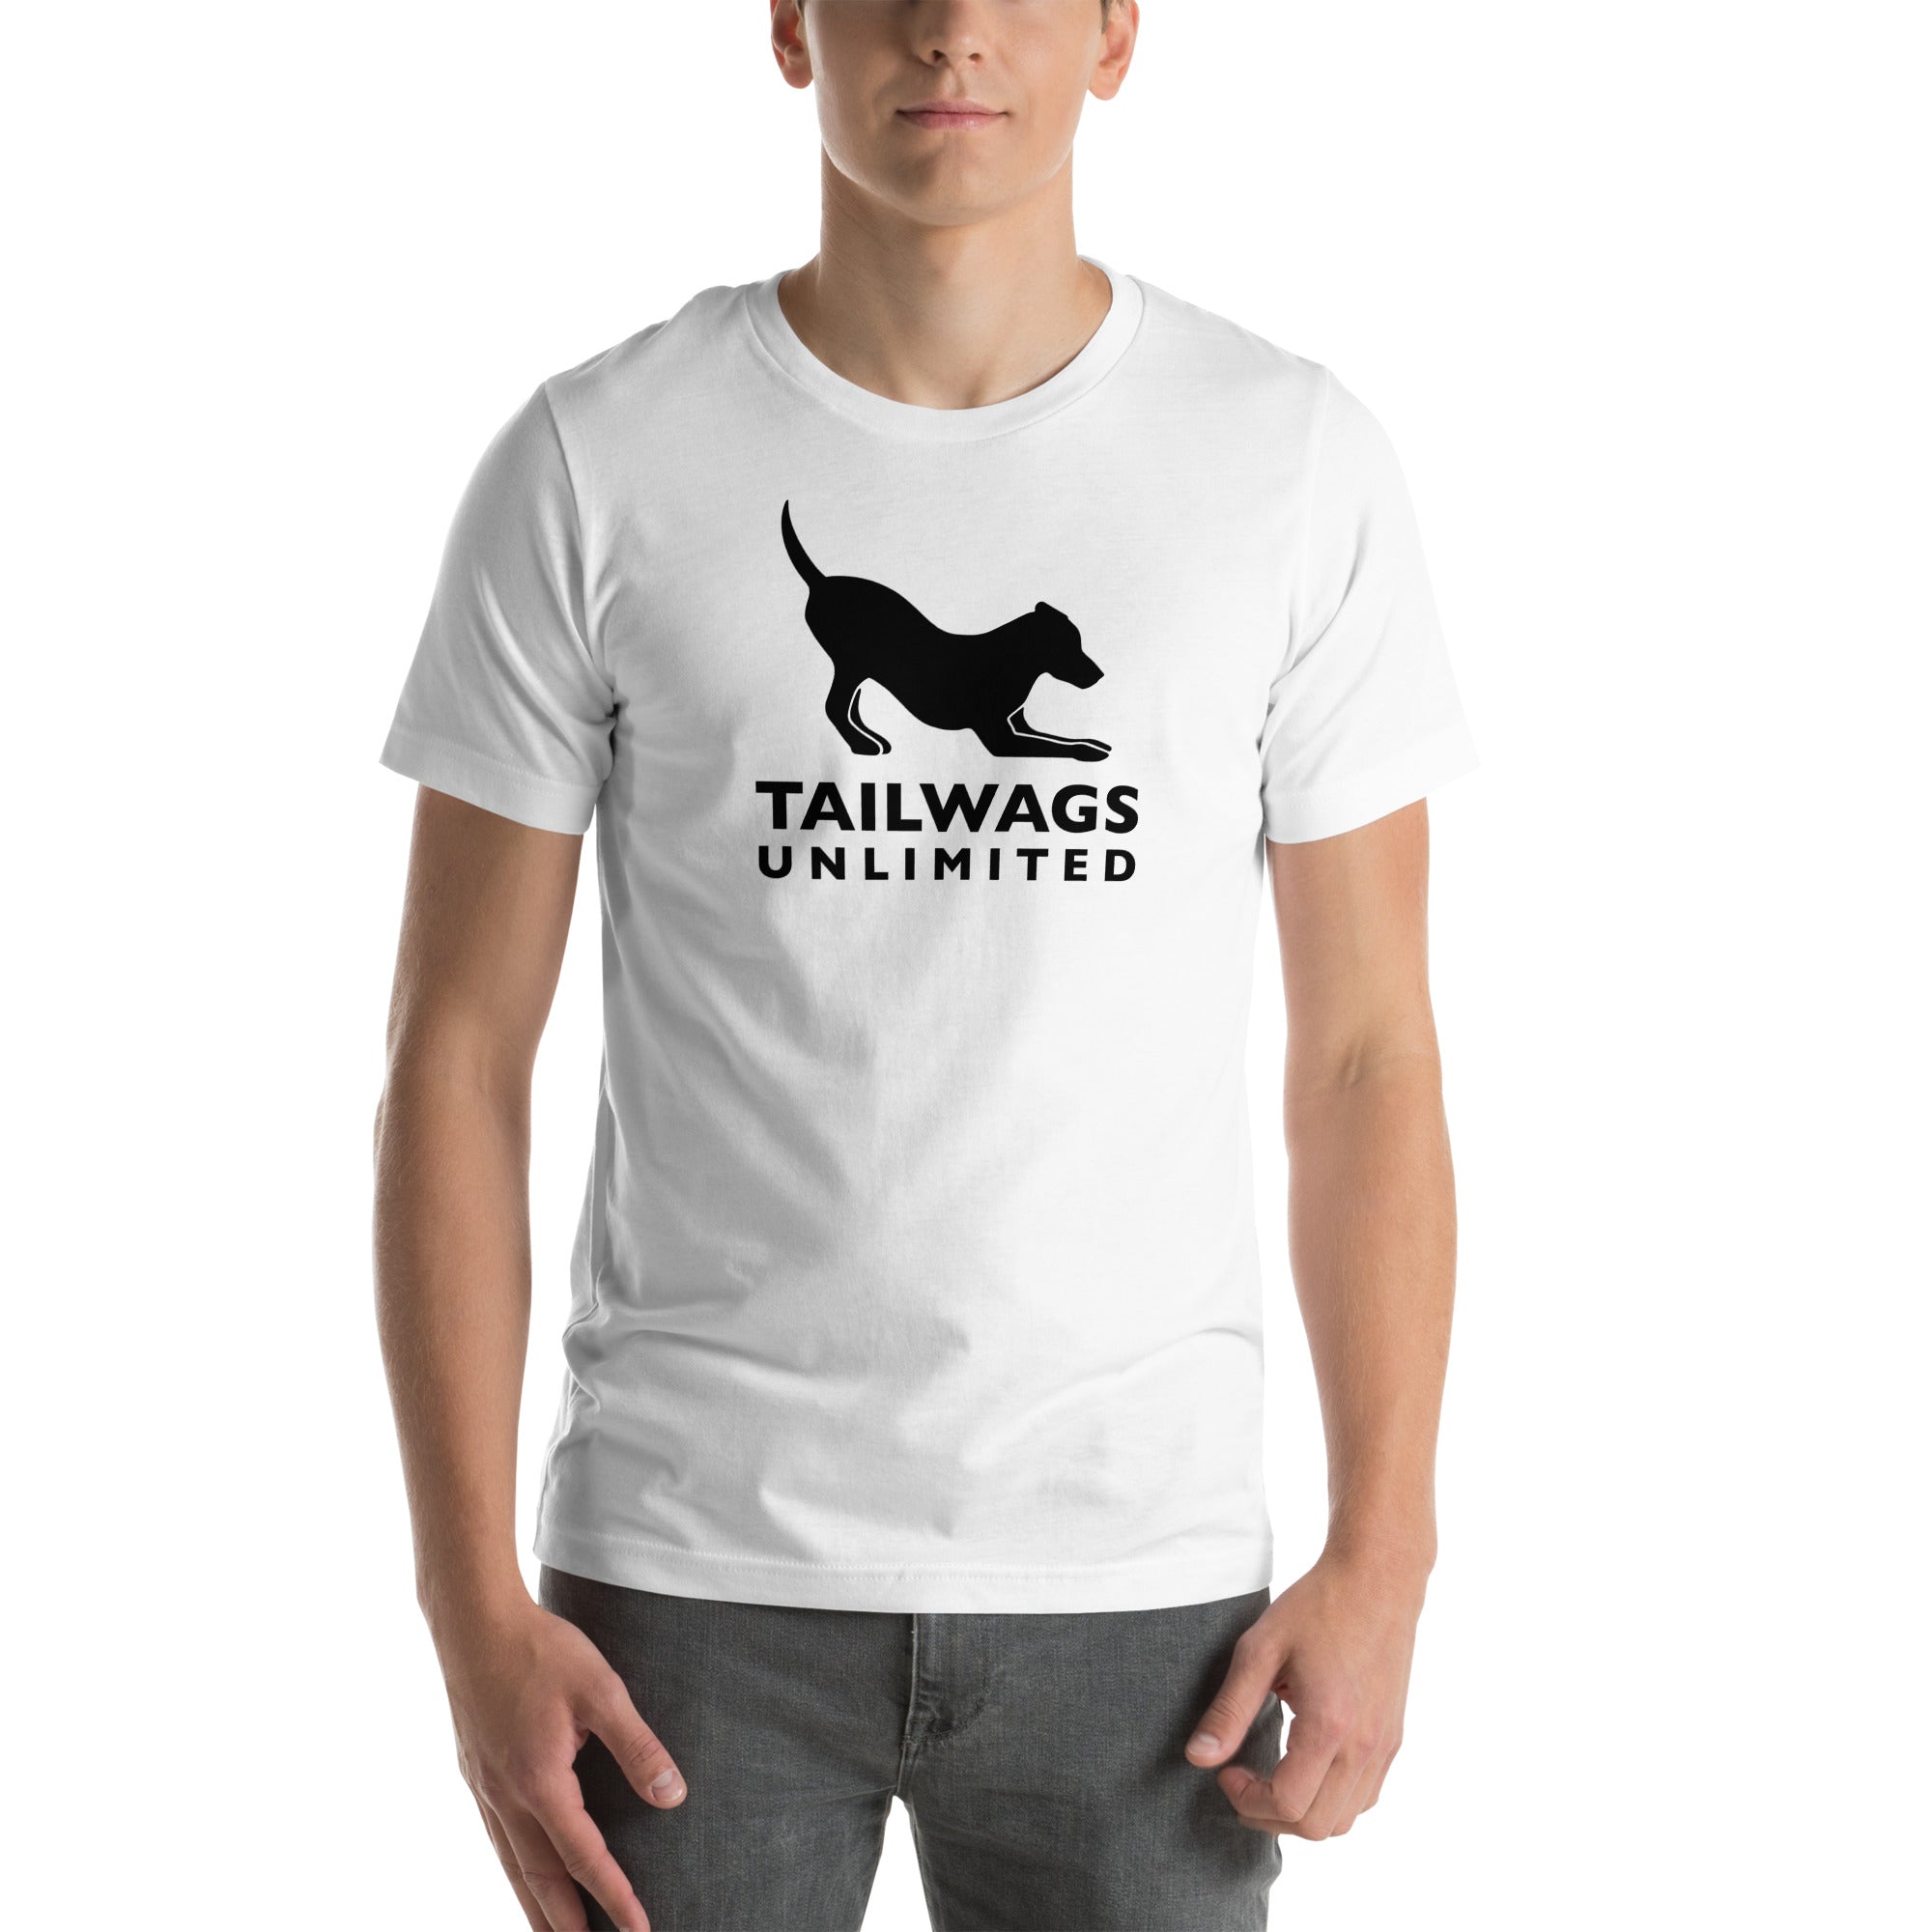 Black Logo T-Shirt - TAILWAGS UNLIMITED